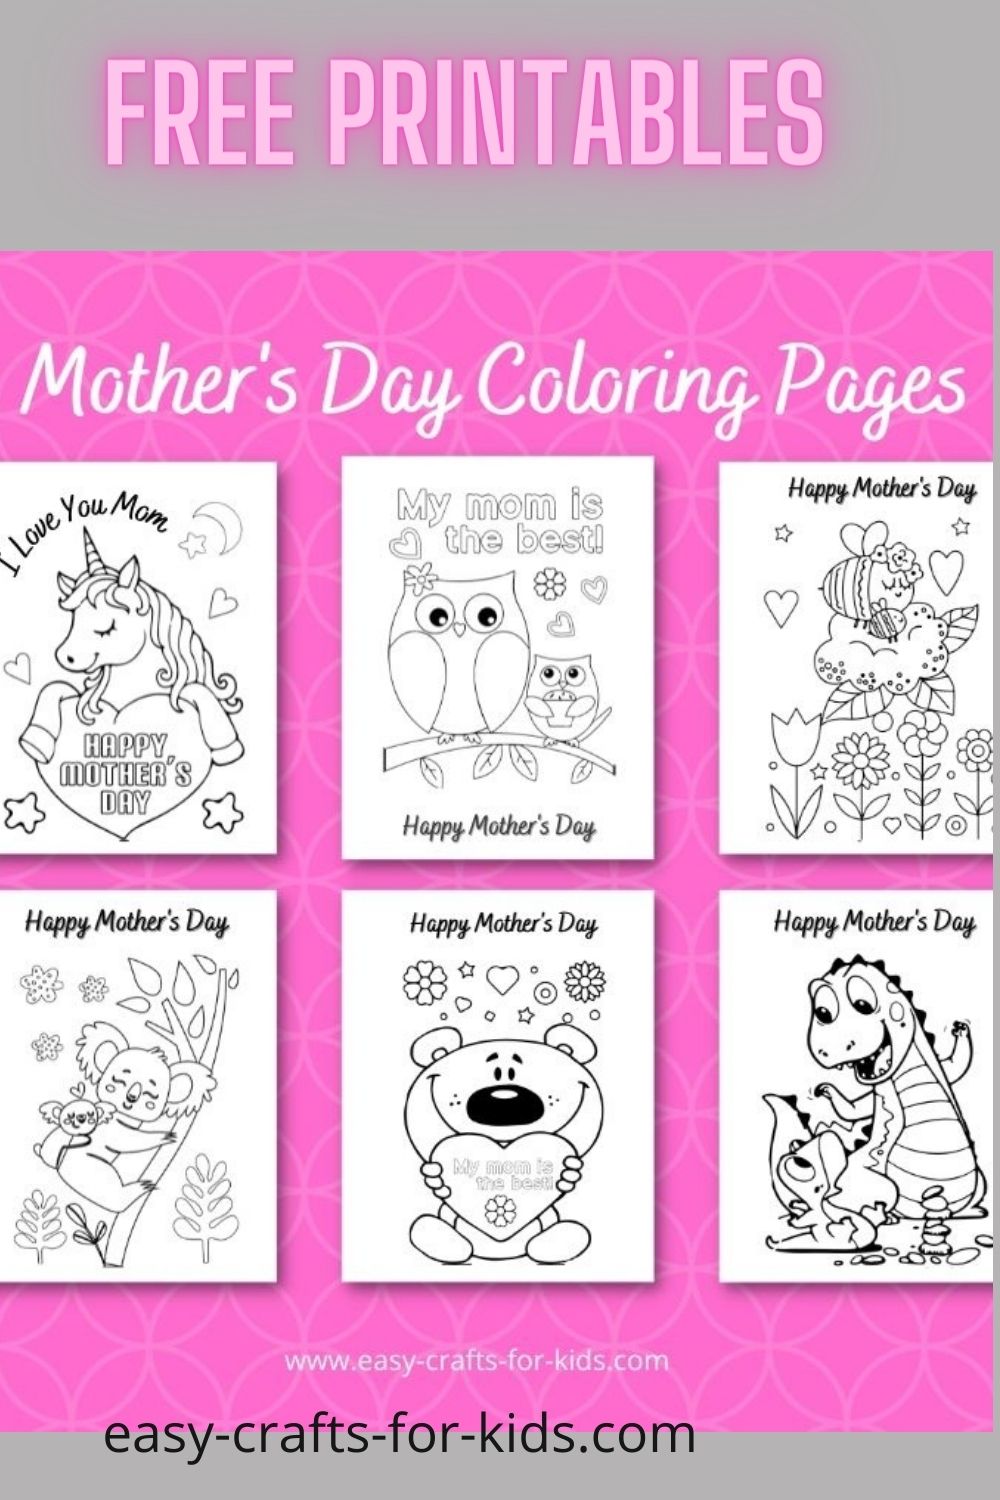 Mother's Day Coloring Pages Free